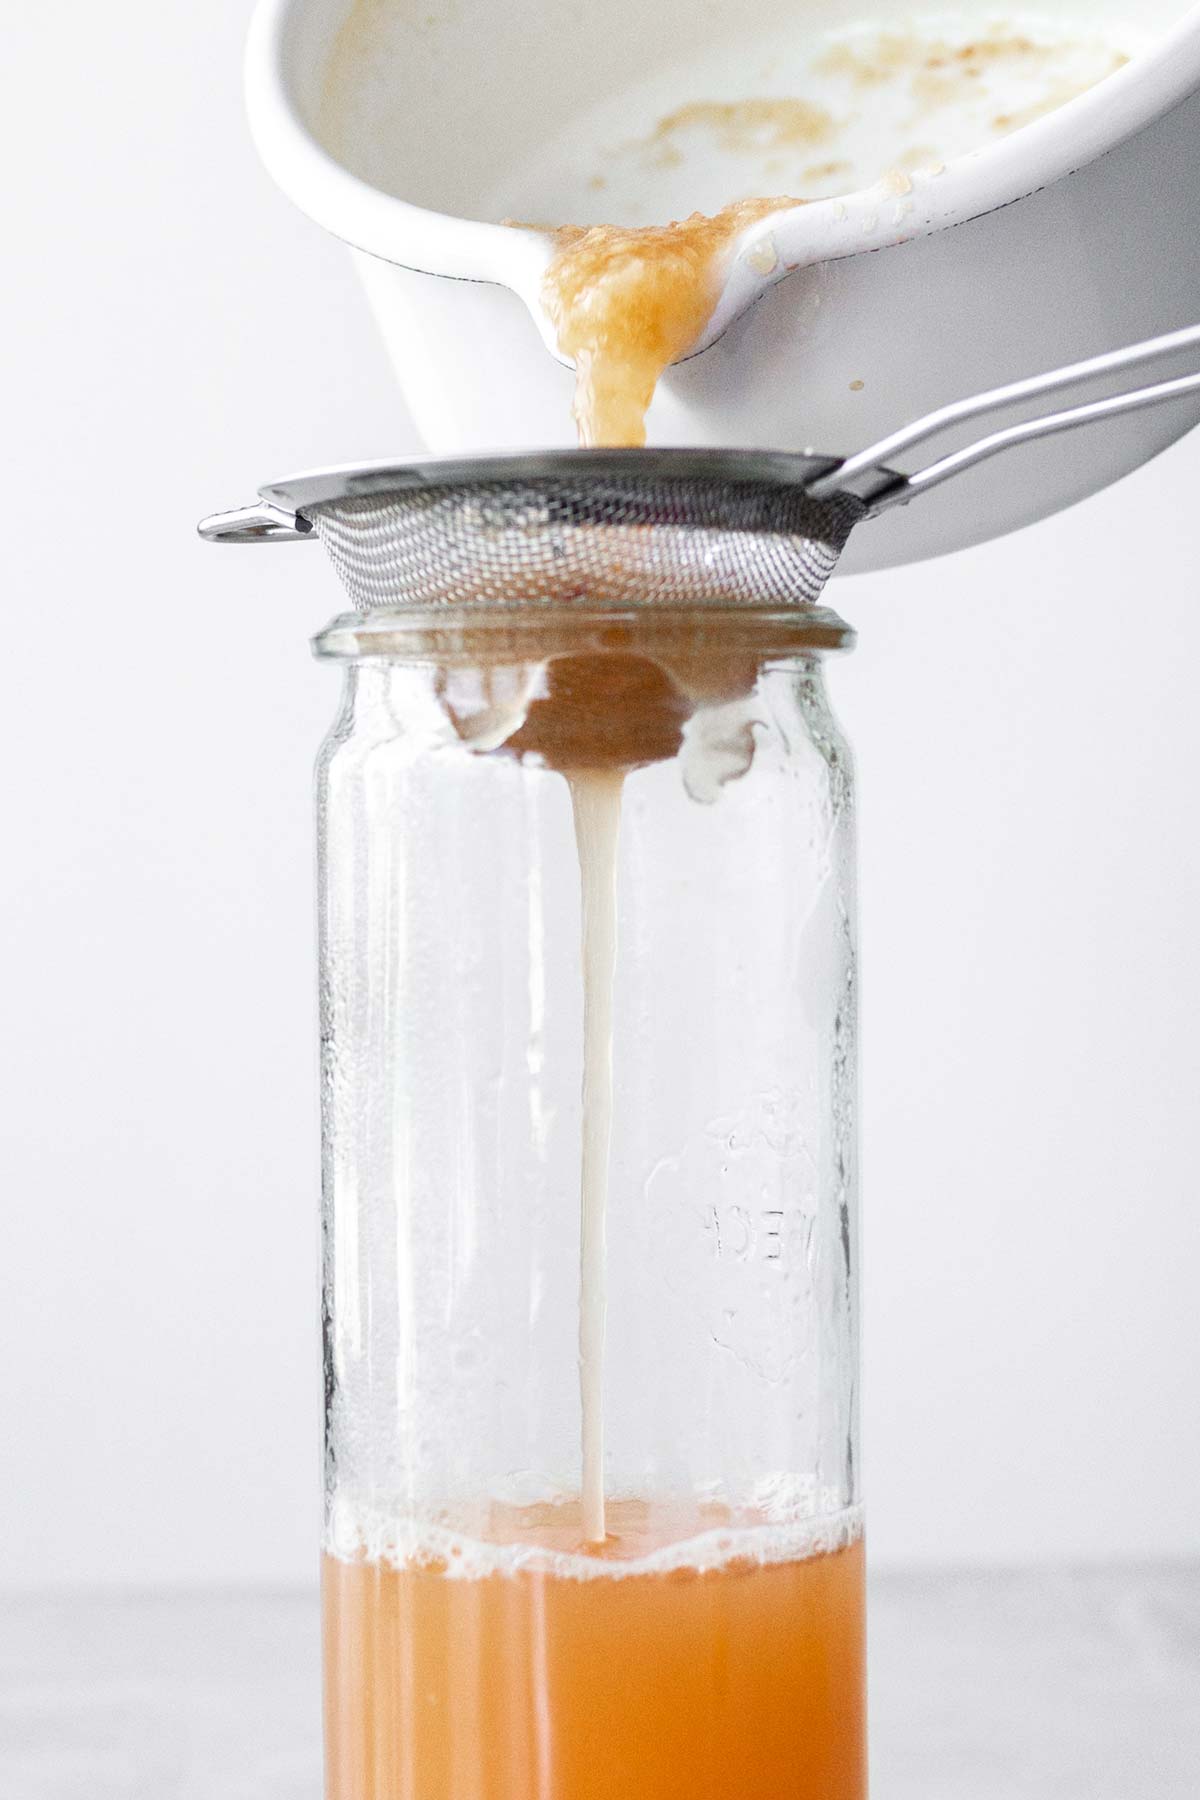 Straining peach puree into a glass container.